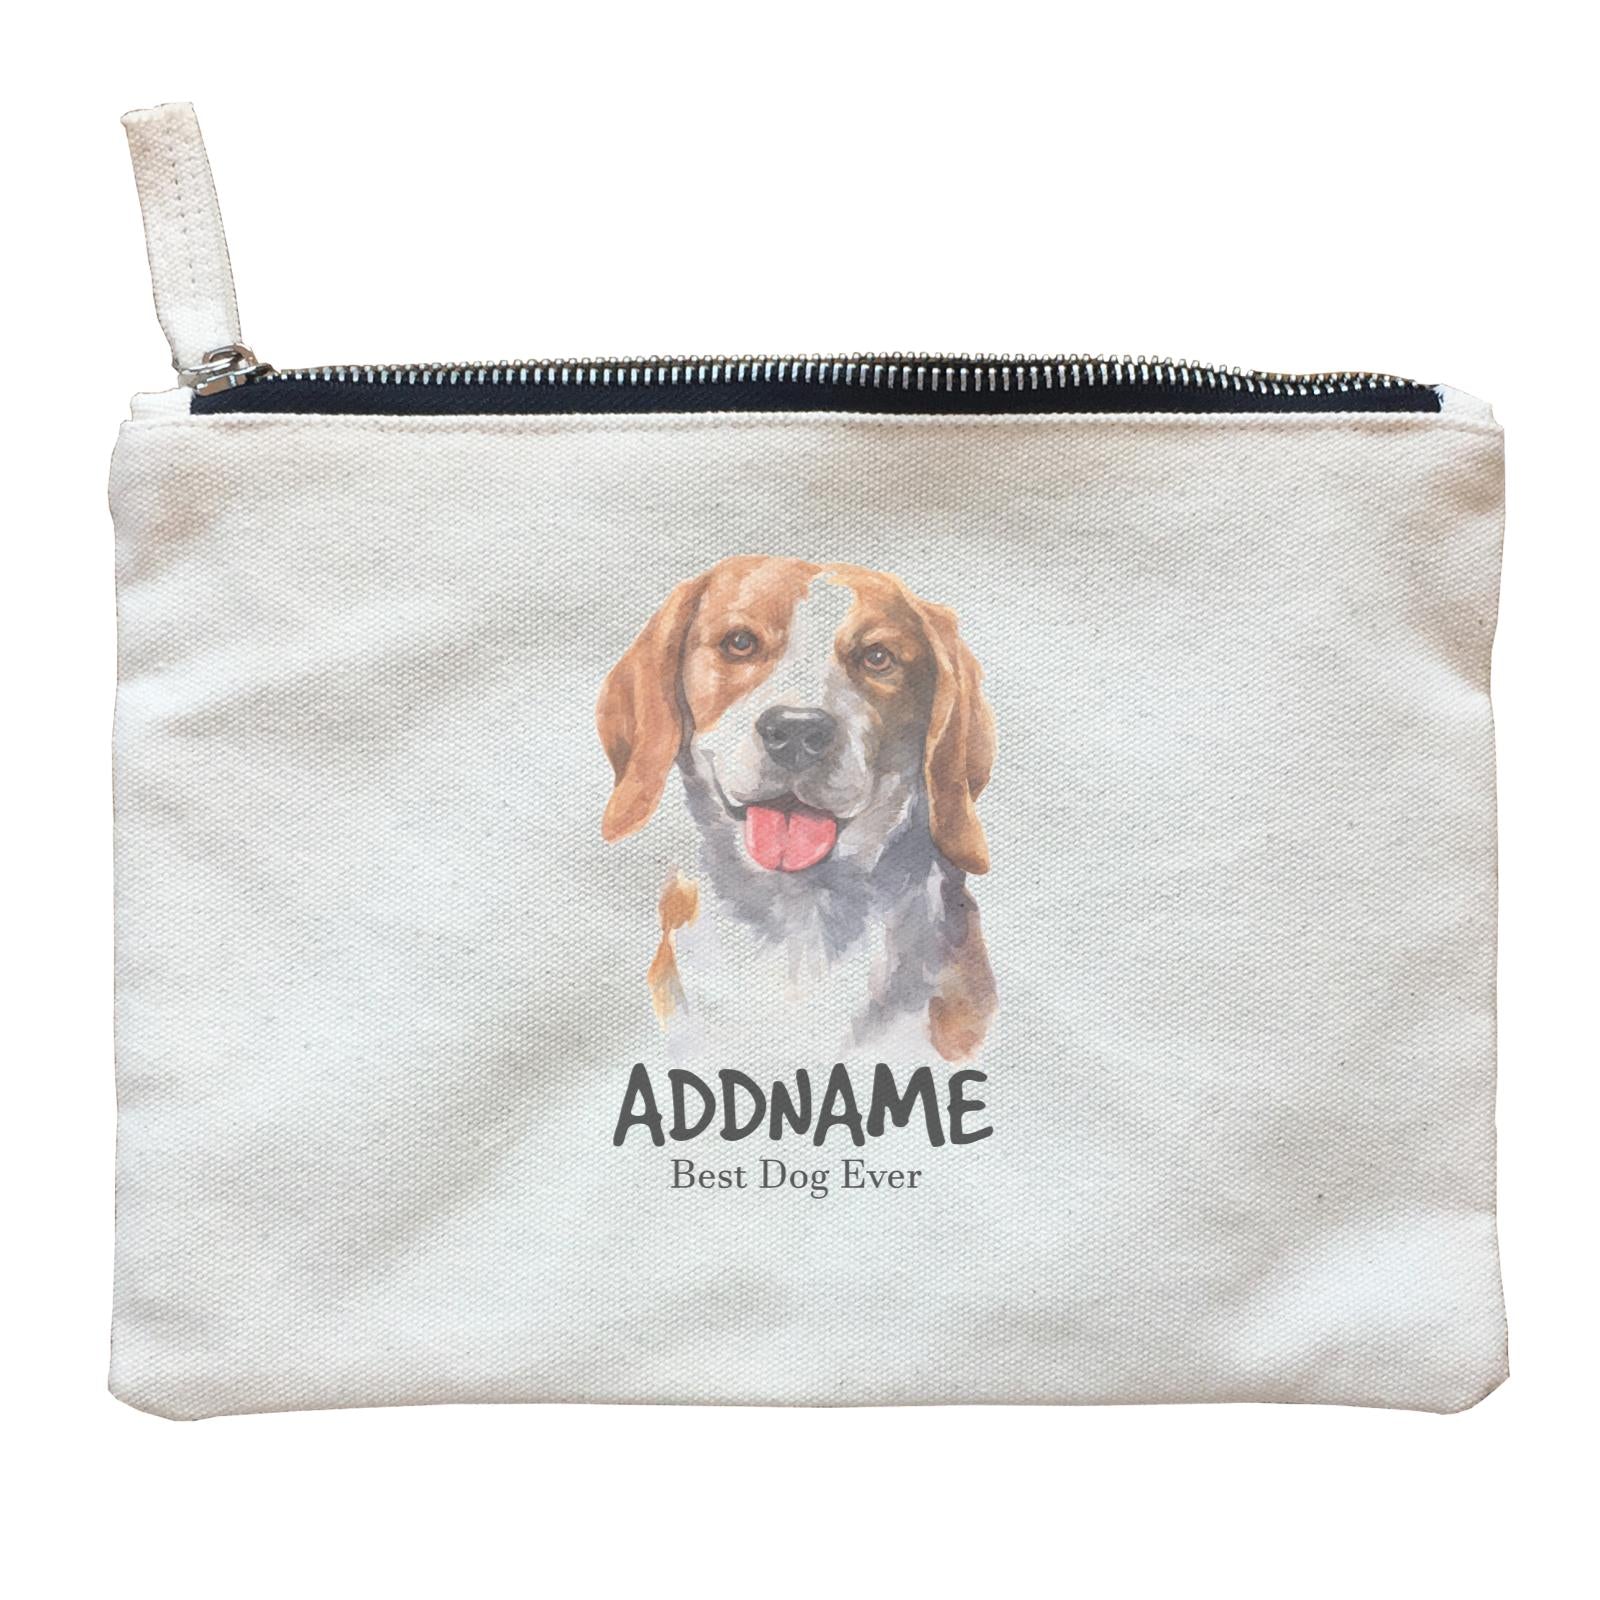 Watercolor Dog Beagle Smile Best Dog Ever Addname Zipper Pouch